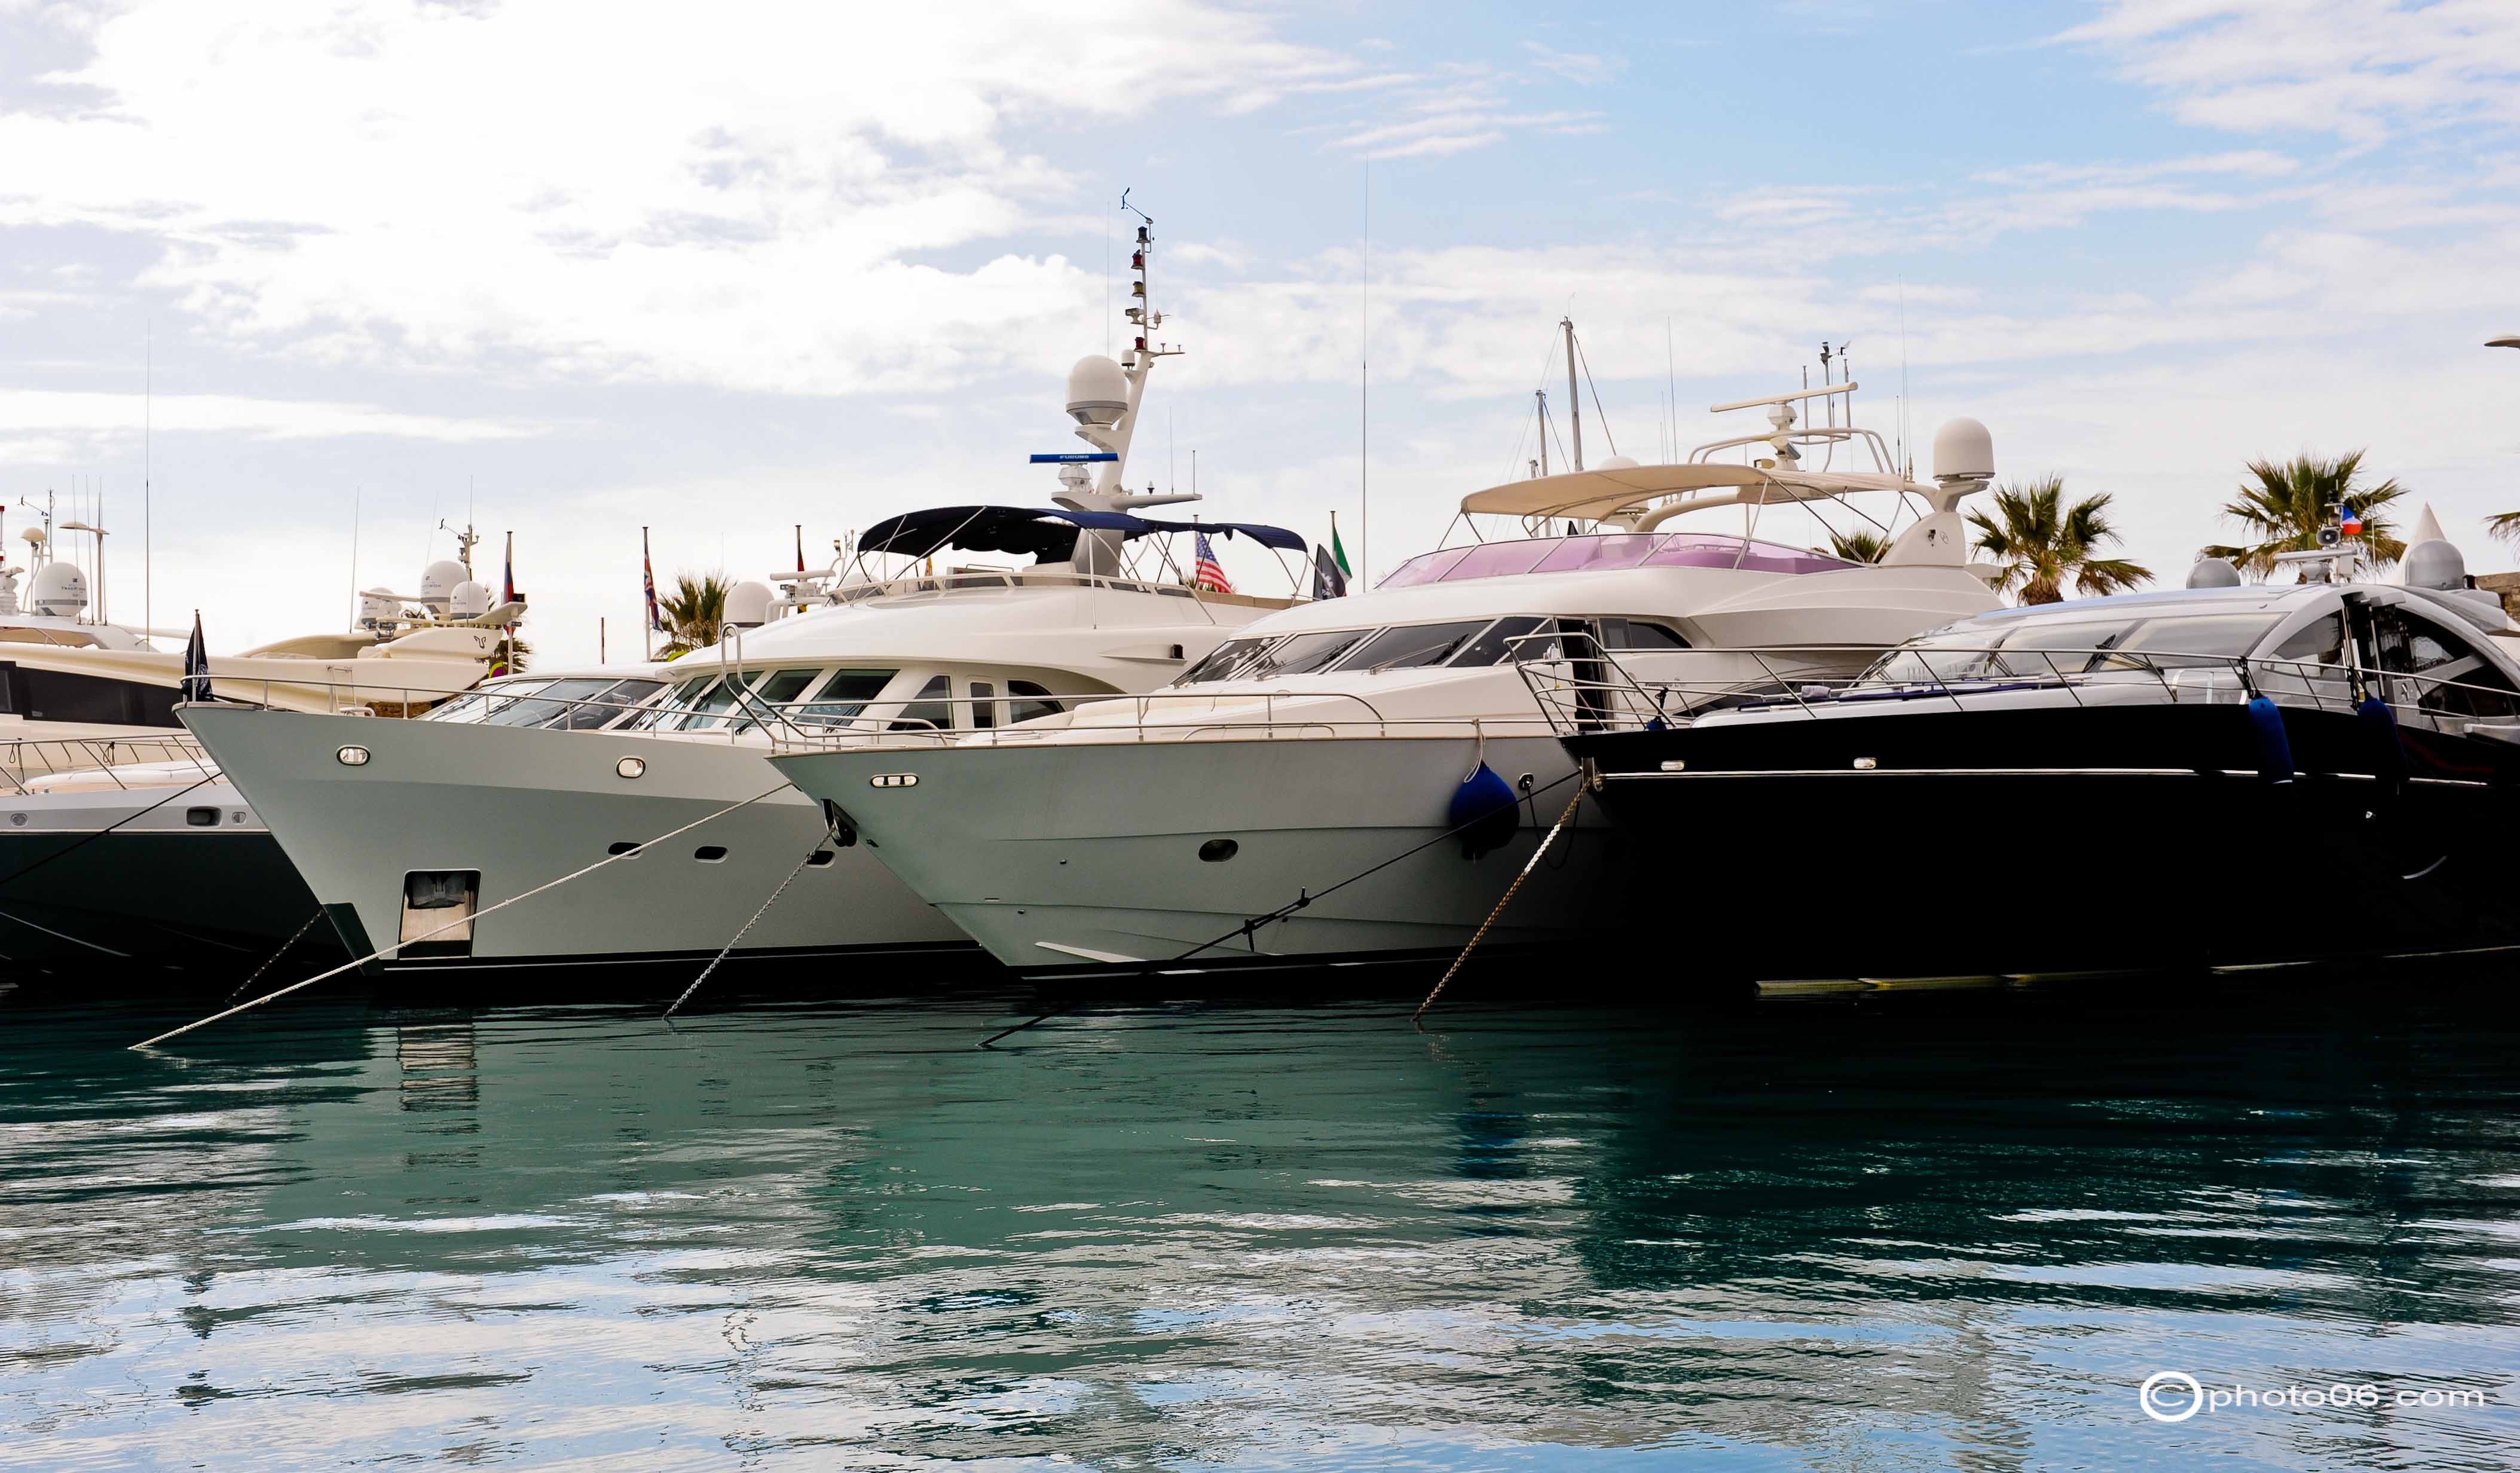 luxyachts antibes